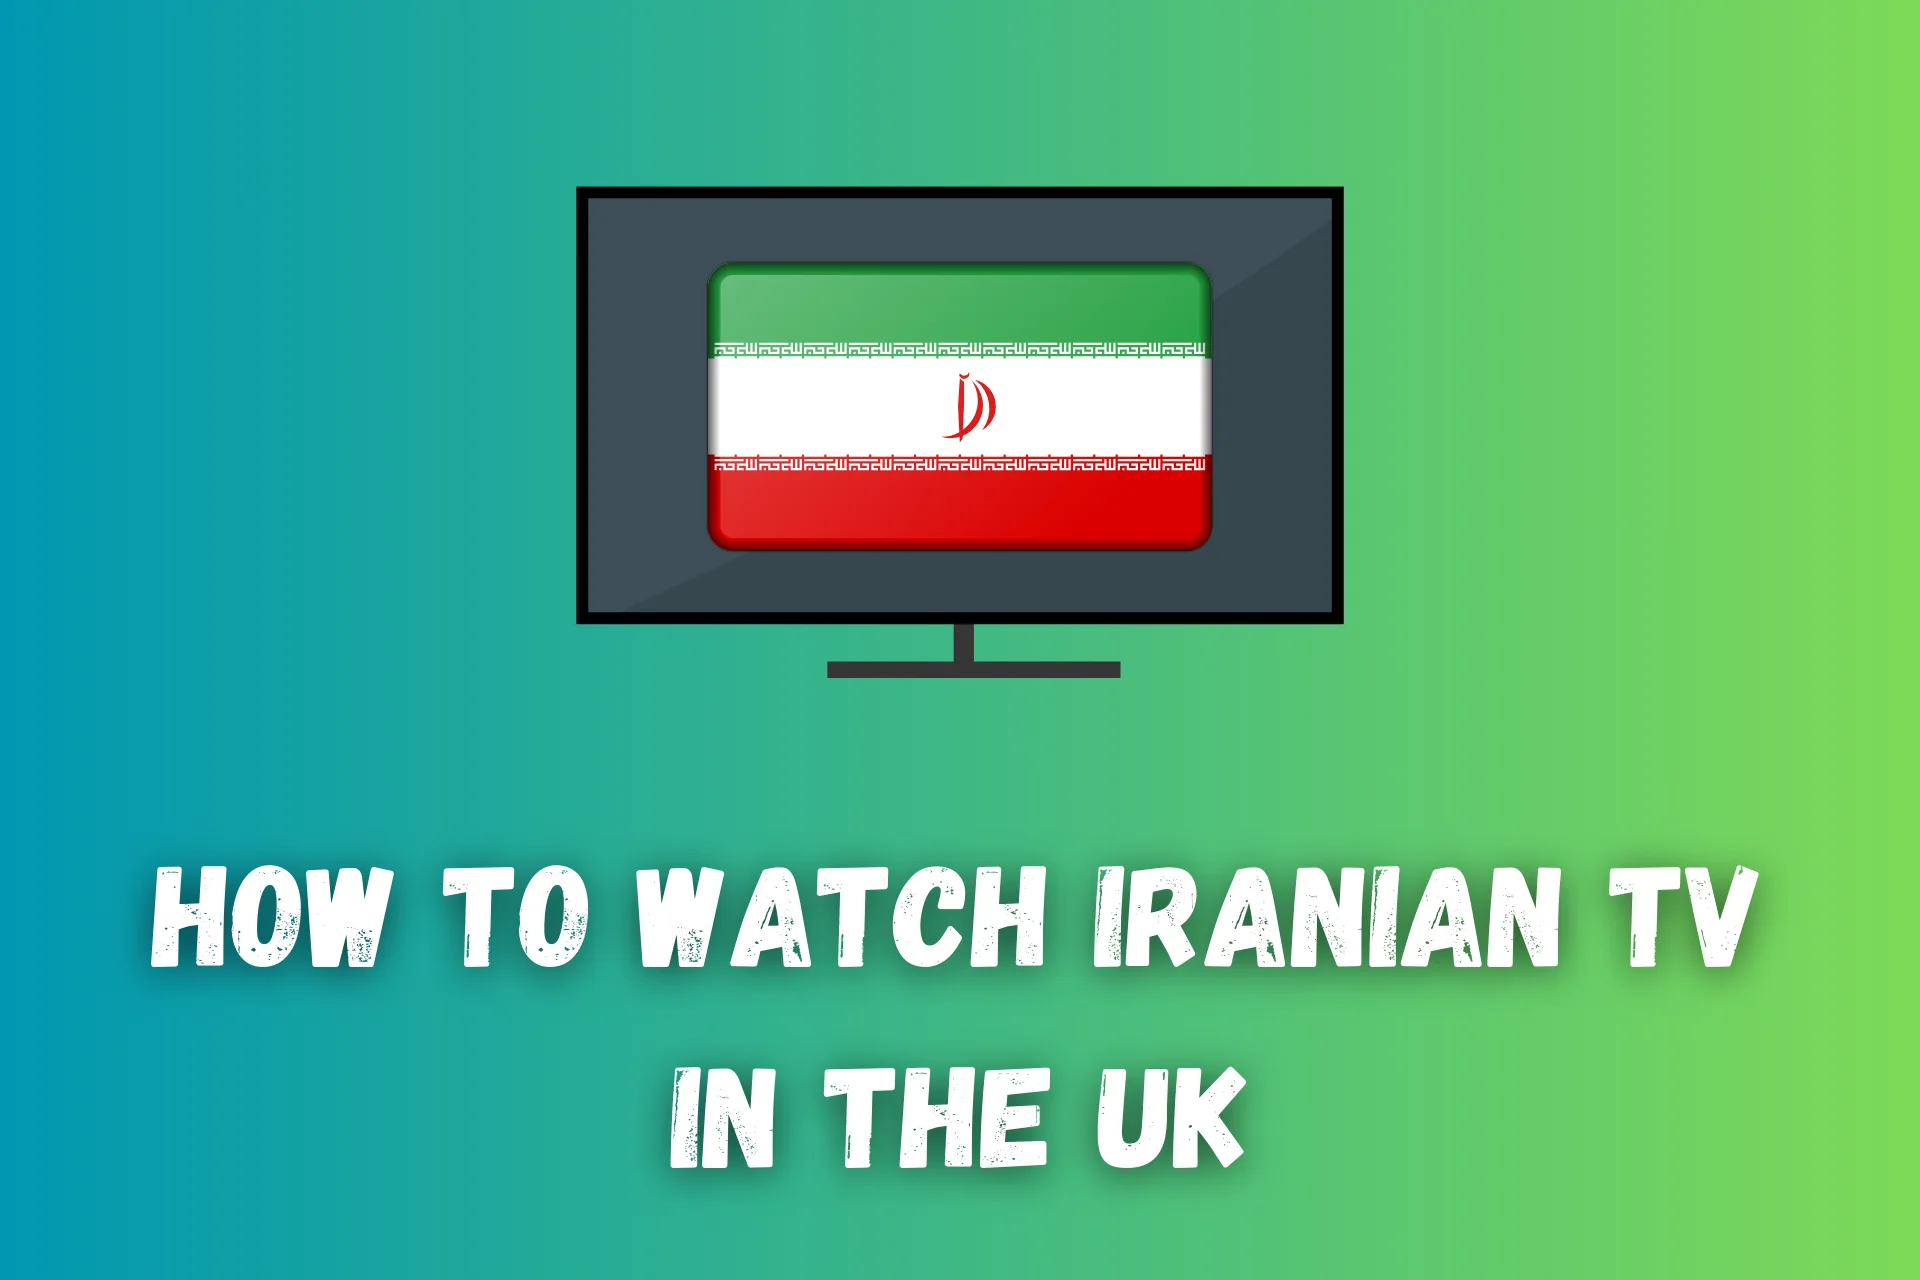 How to Watch Iranian TV in The UK [Easy Step-By-Step Guide]